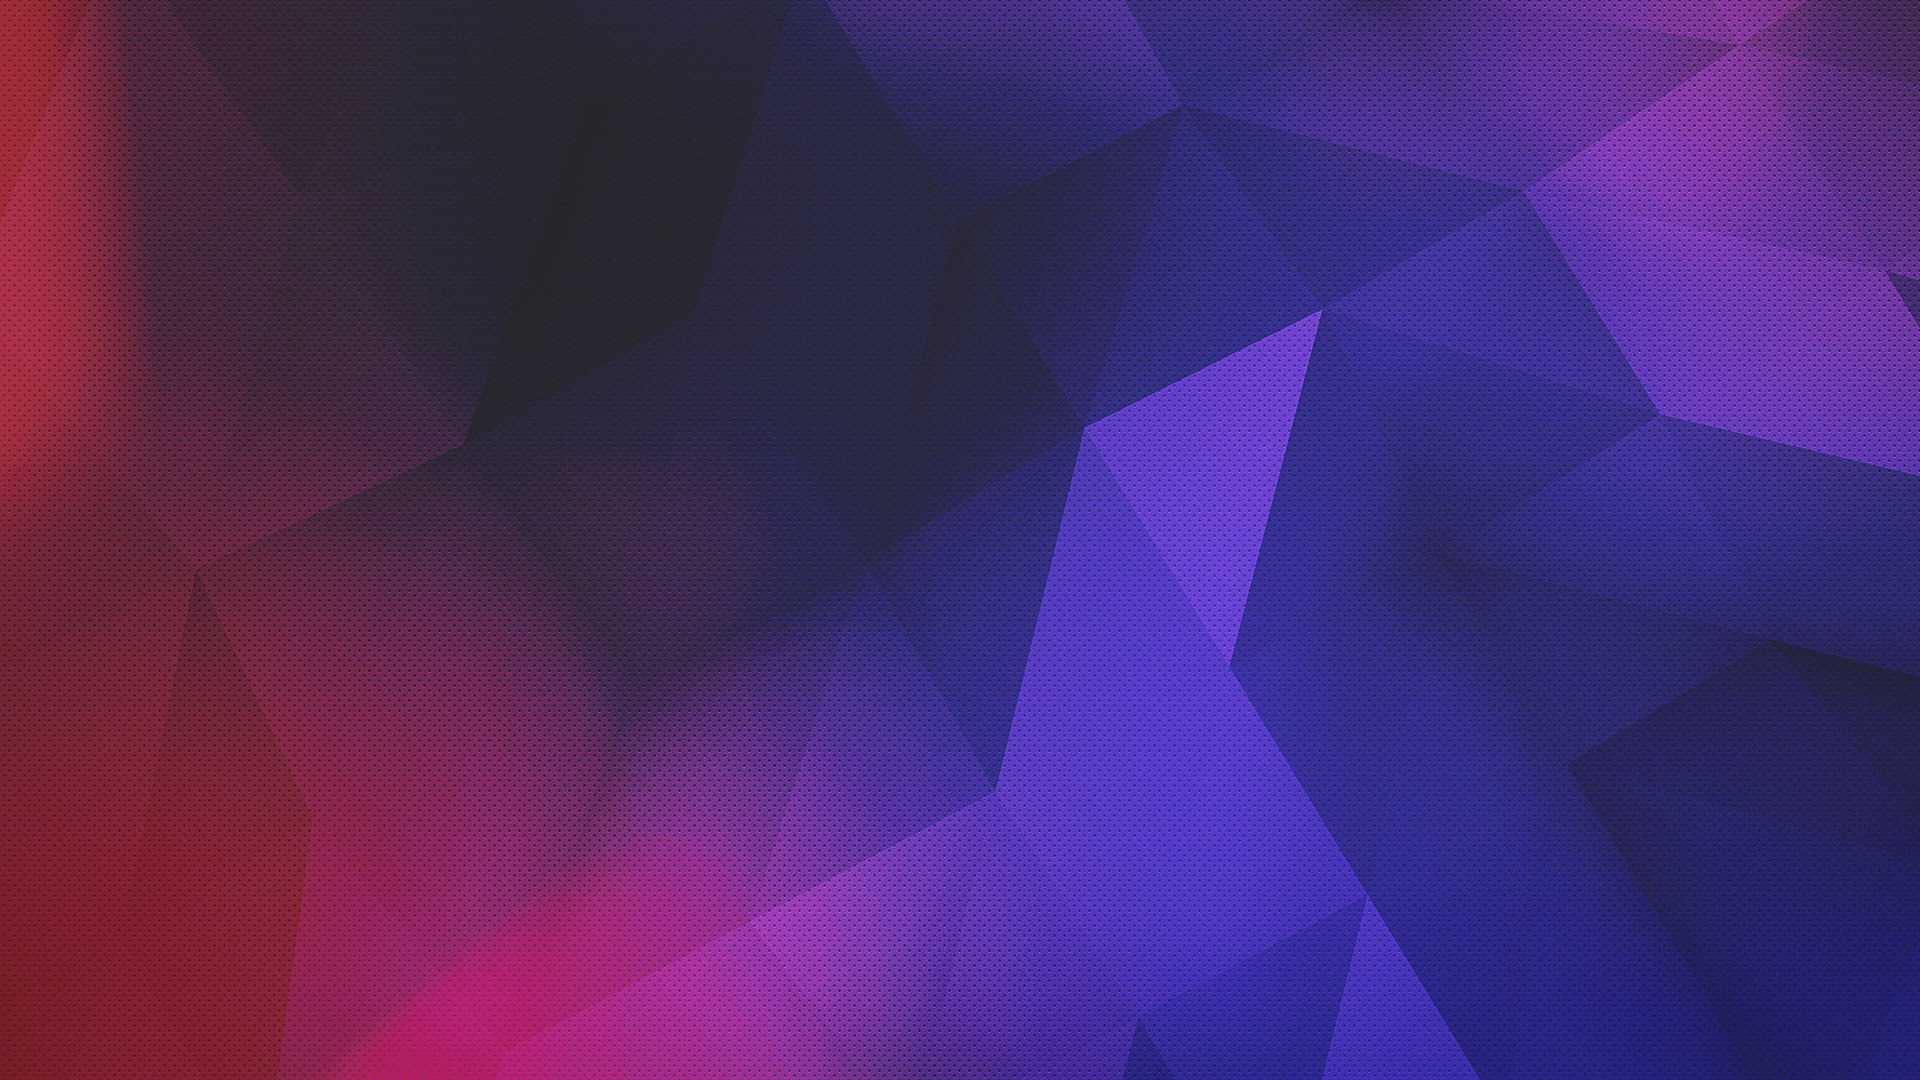 Found this on /r/wallpapers : bisexual